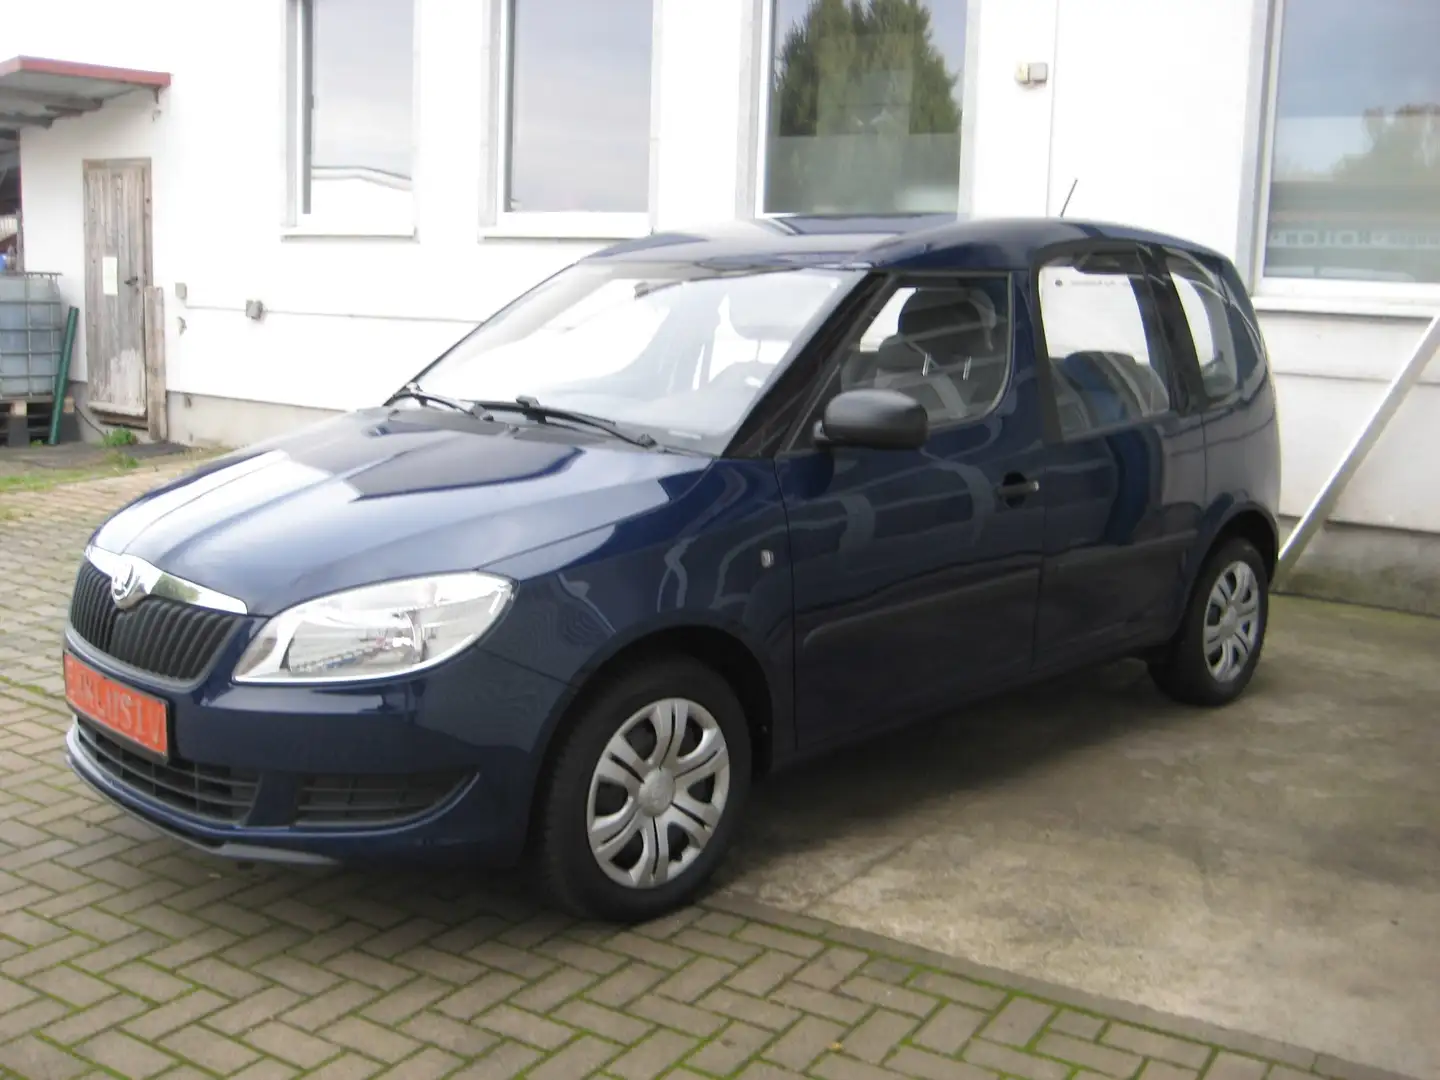 Skoda Roomster 1.4 MPI Ambition PLUS EDITION Blue - 2